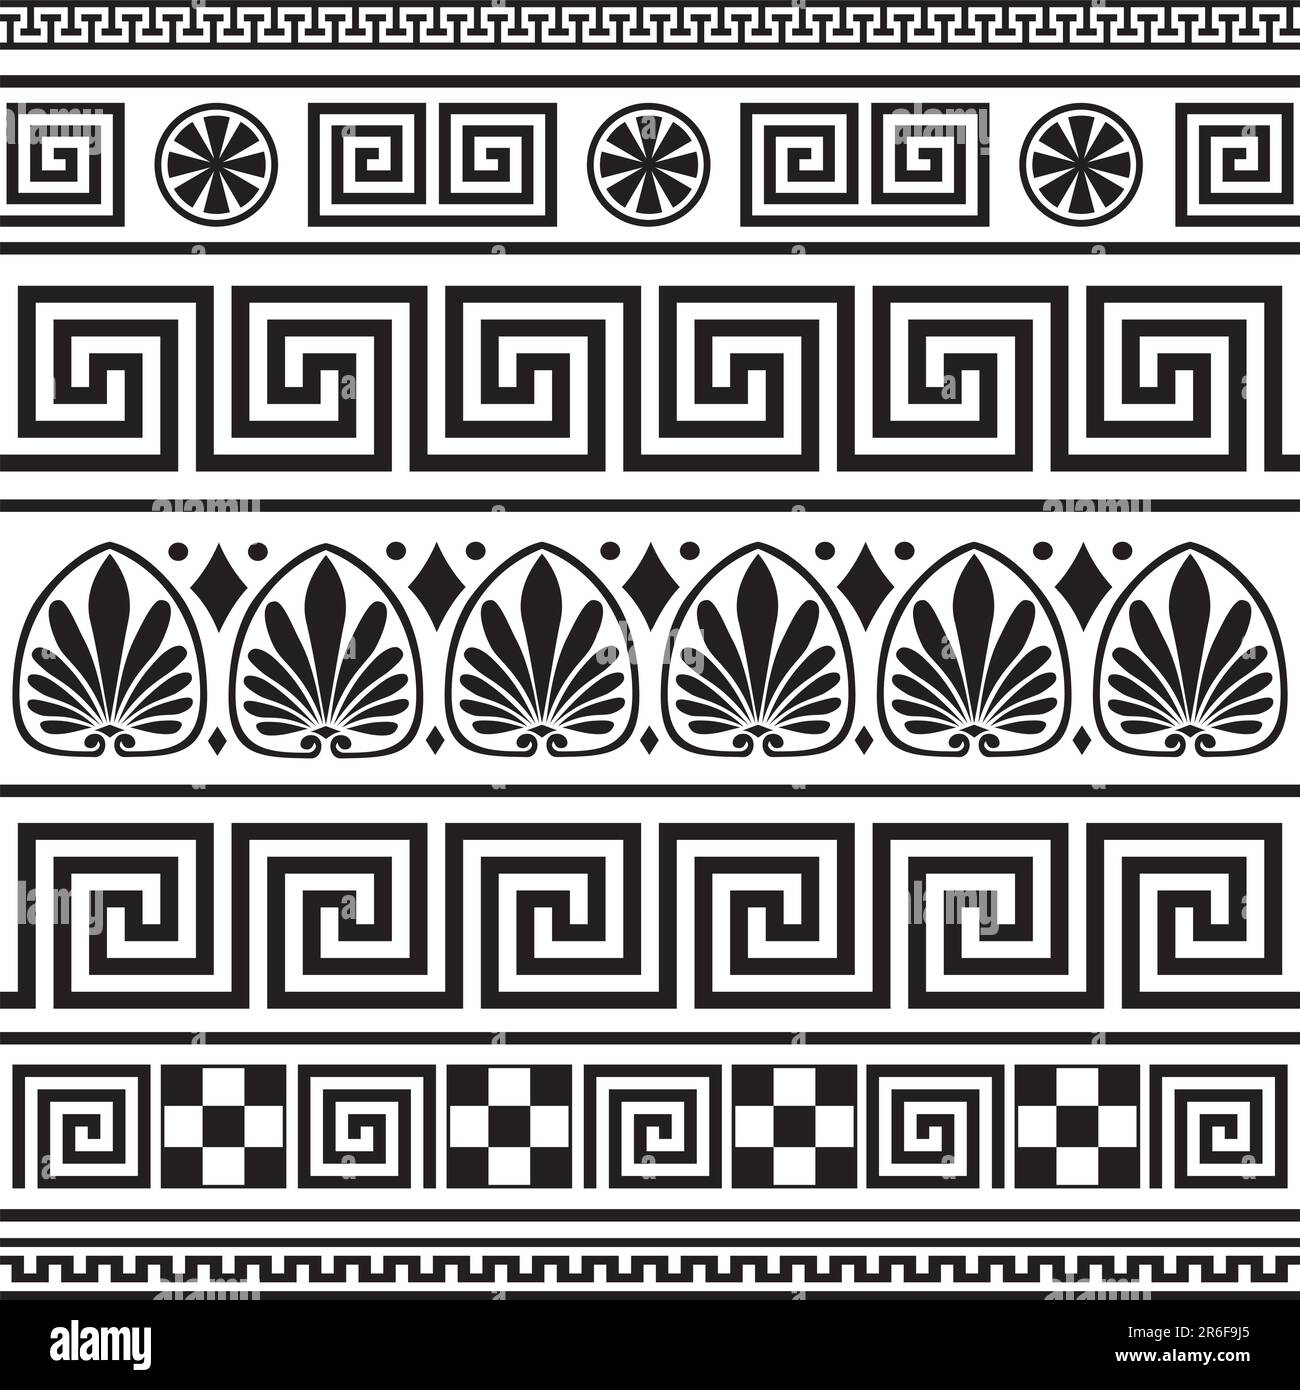 Set of vector greek borders, full scalable vector graphic, change colors as you like, included 300 dpi JPG. Elements isolated on white. Stock Vector